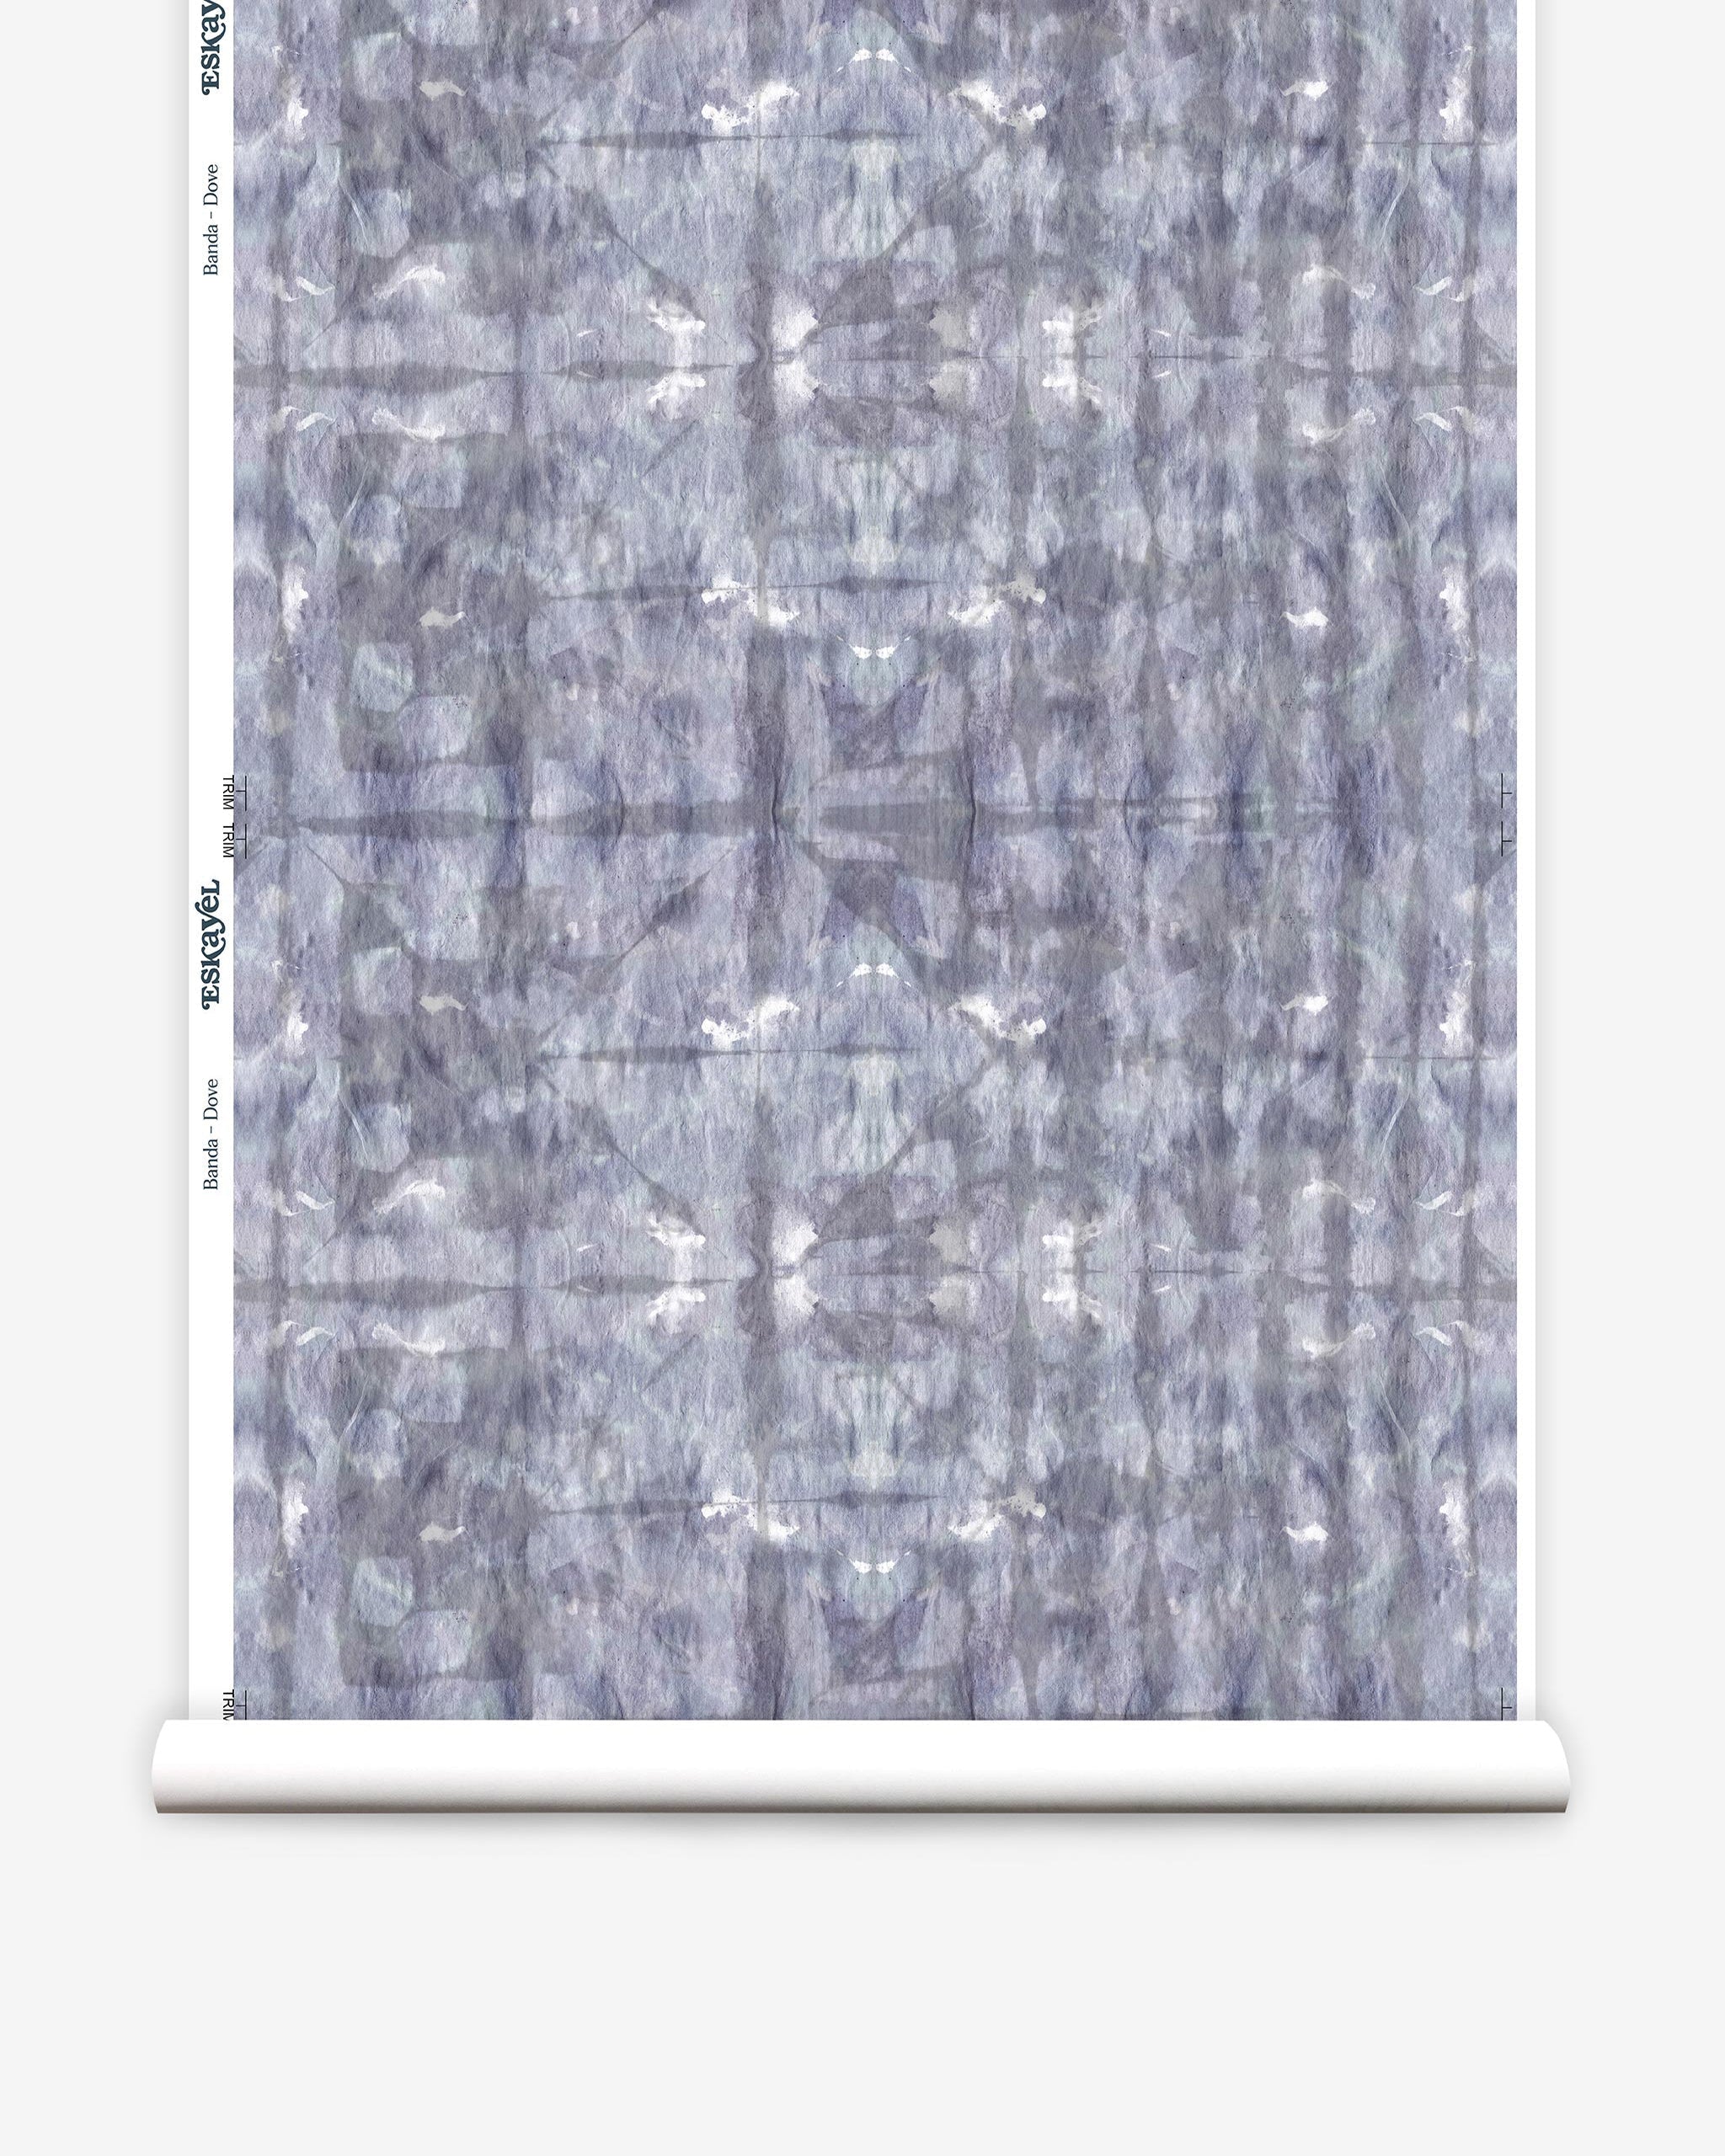 Partially unrolled wallpaper yardage in an abstract dyed grid print in mottled purple.